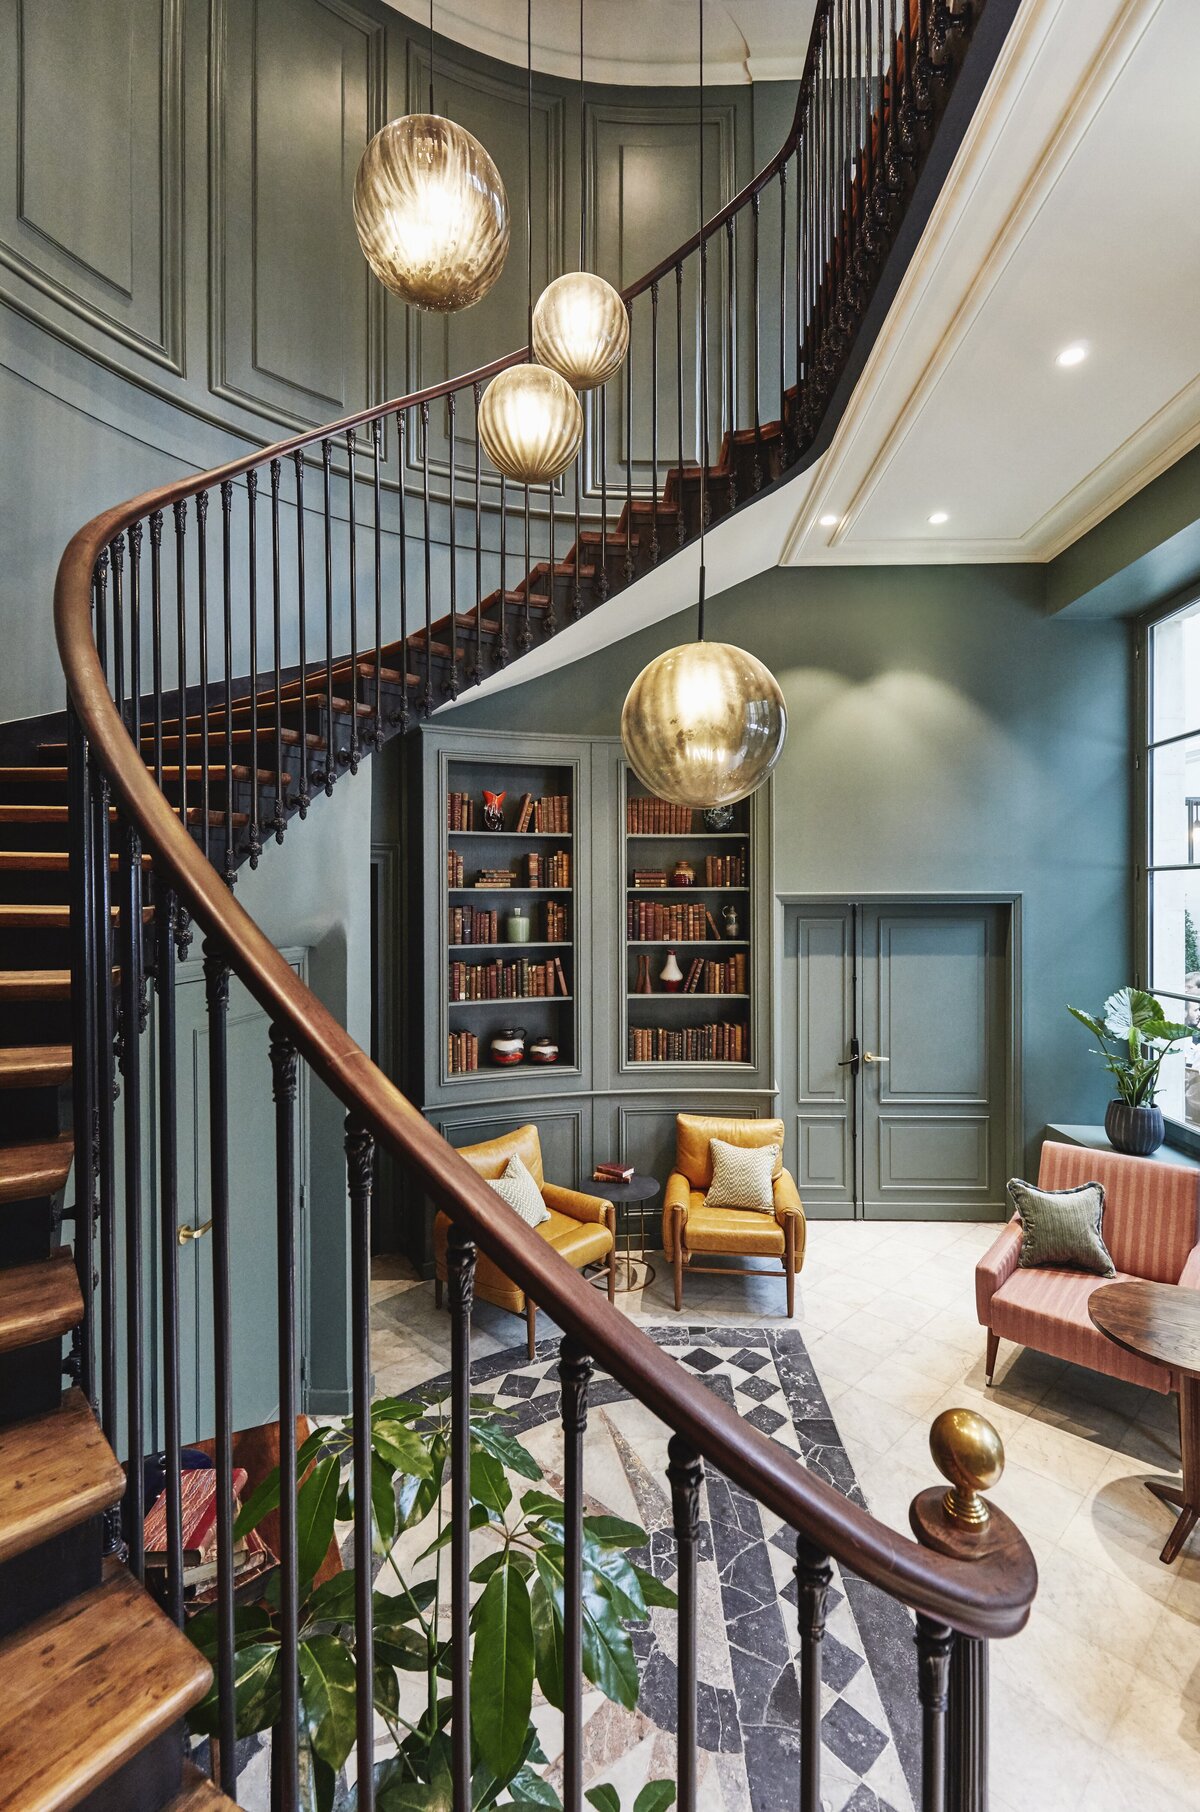 Parisian stairwell with marble floor, staircase with wooden treads, and  metal handrail, teal painted walls with built in shelving